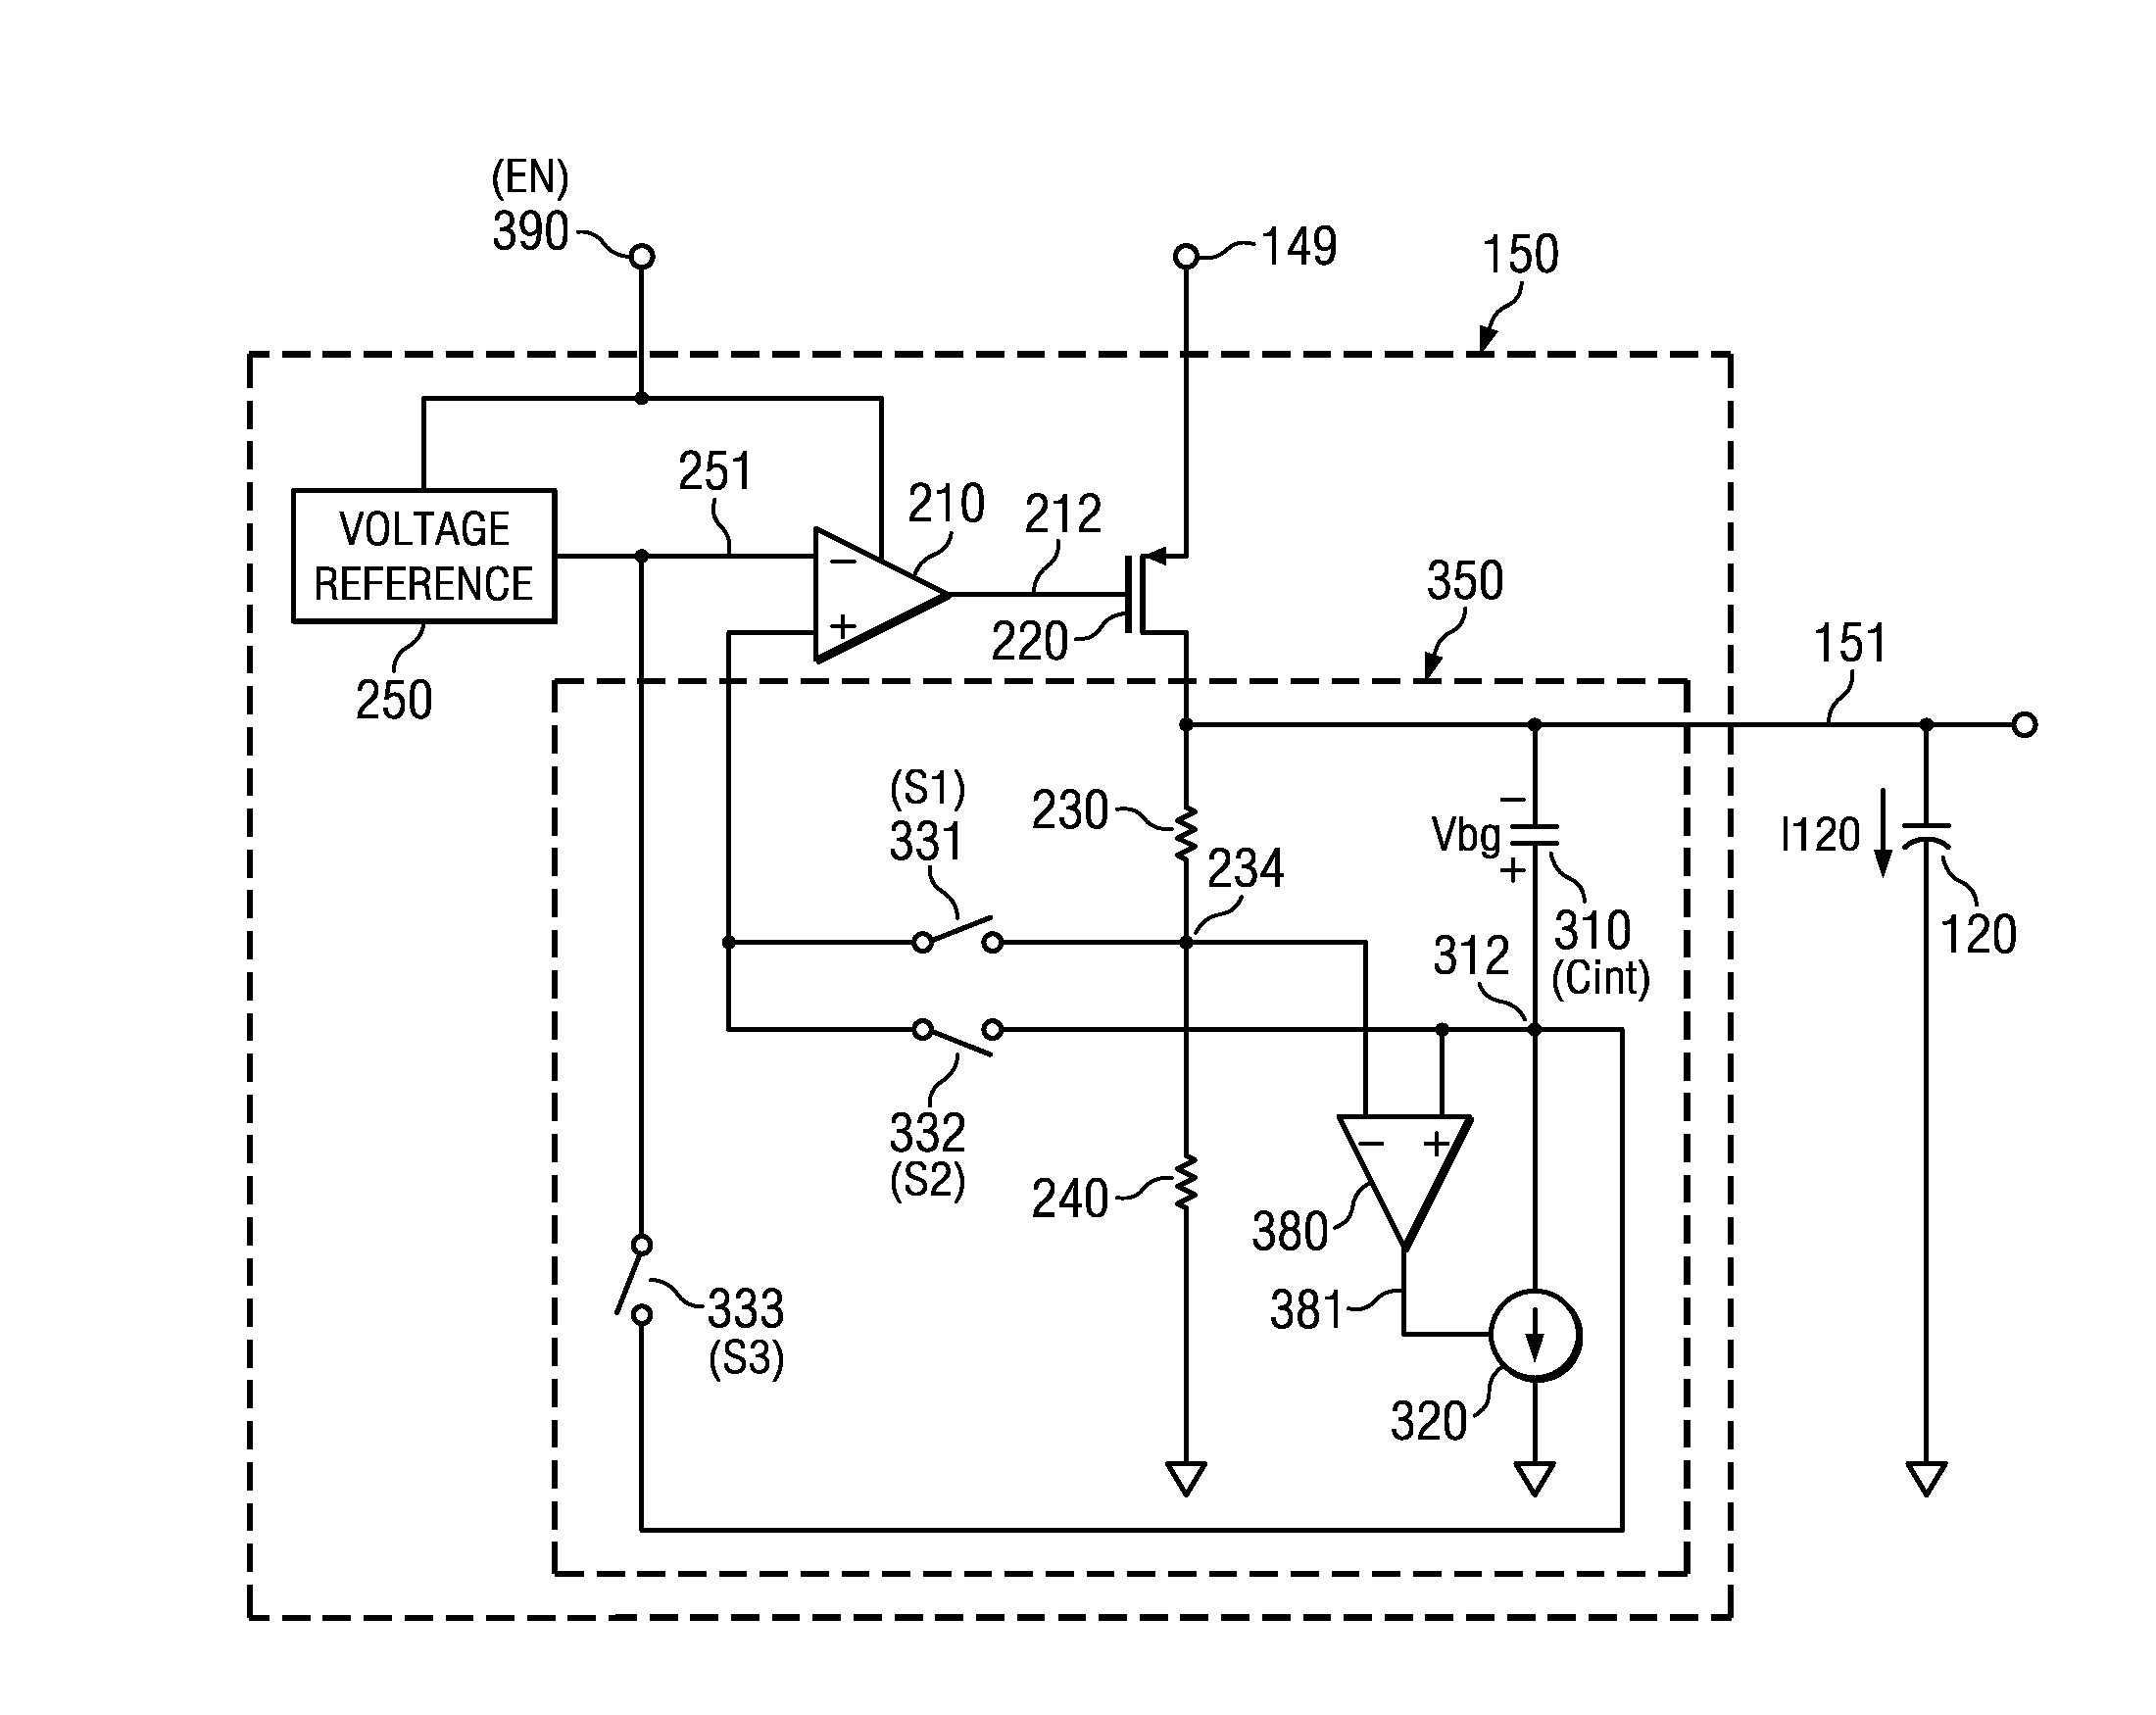 Voltage regulator stabilization for operation with a wide range of output capacitances